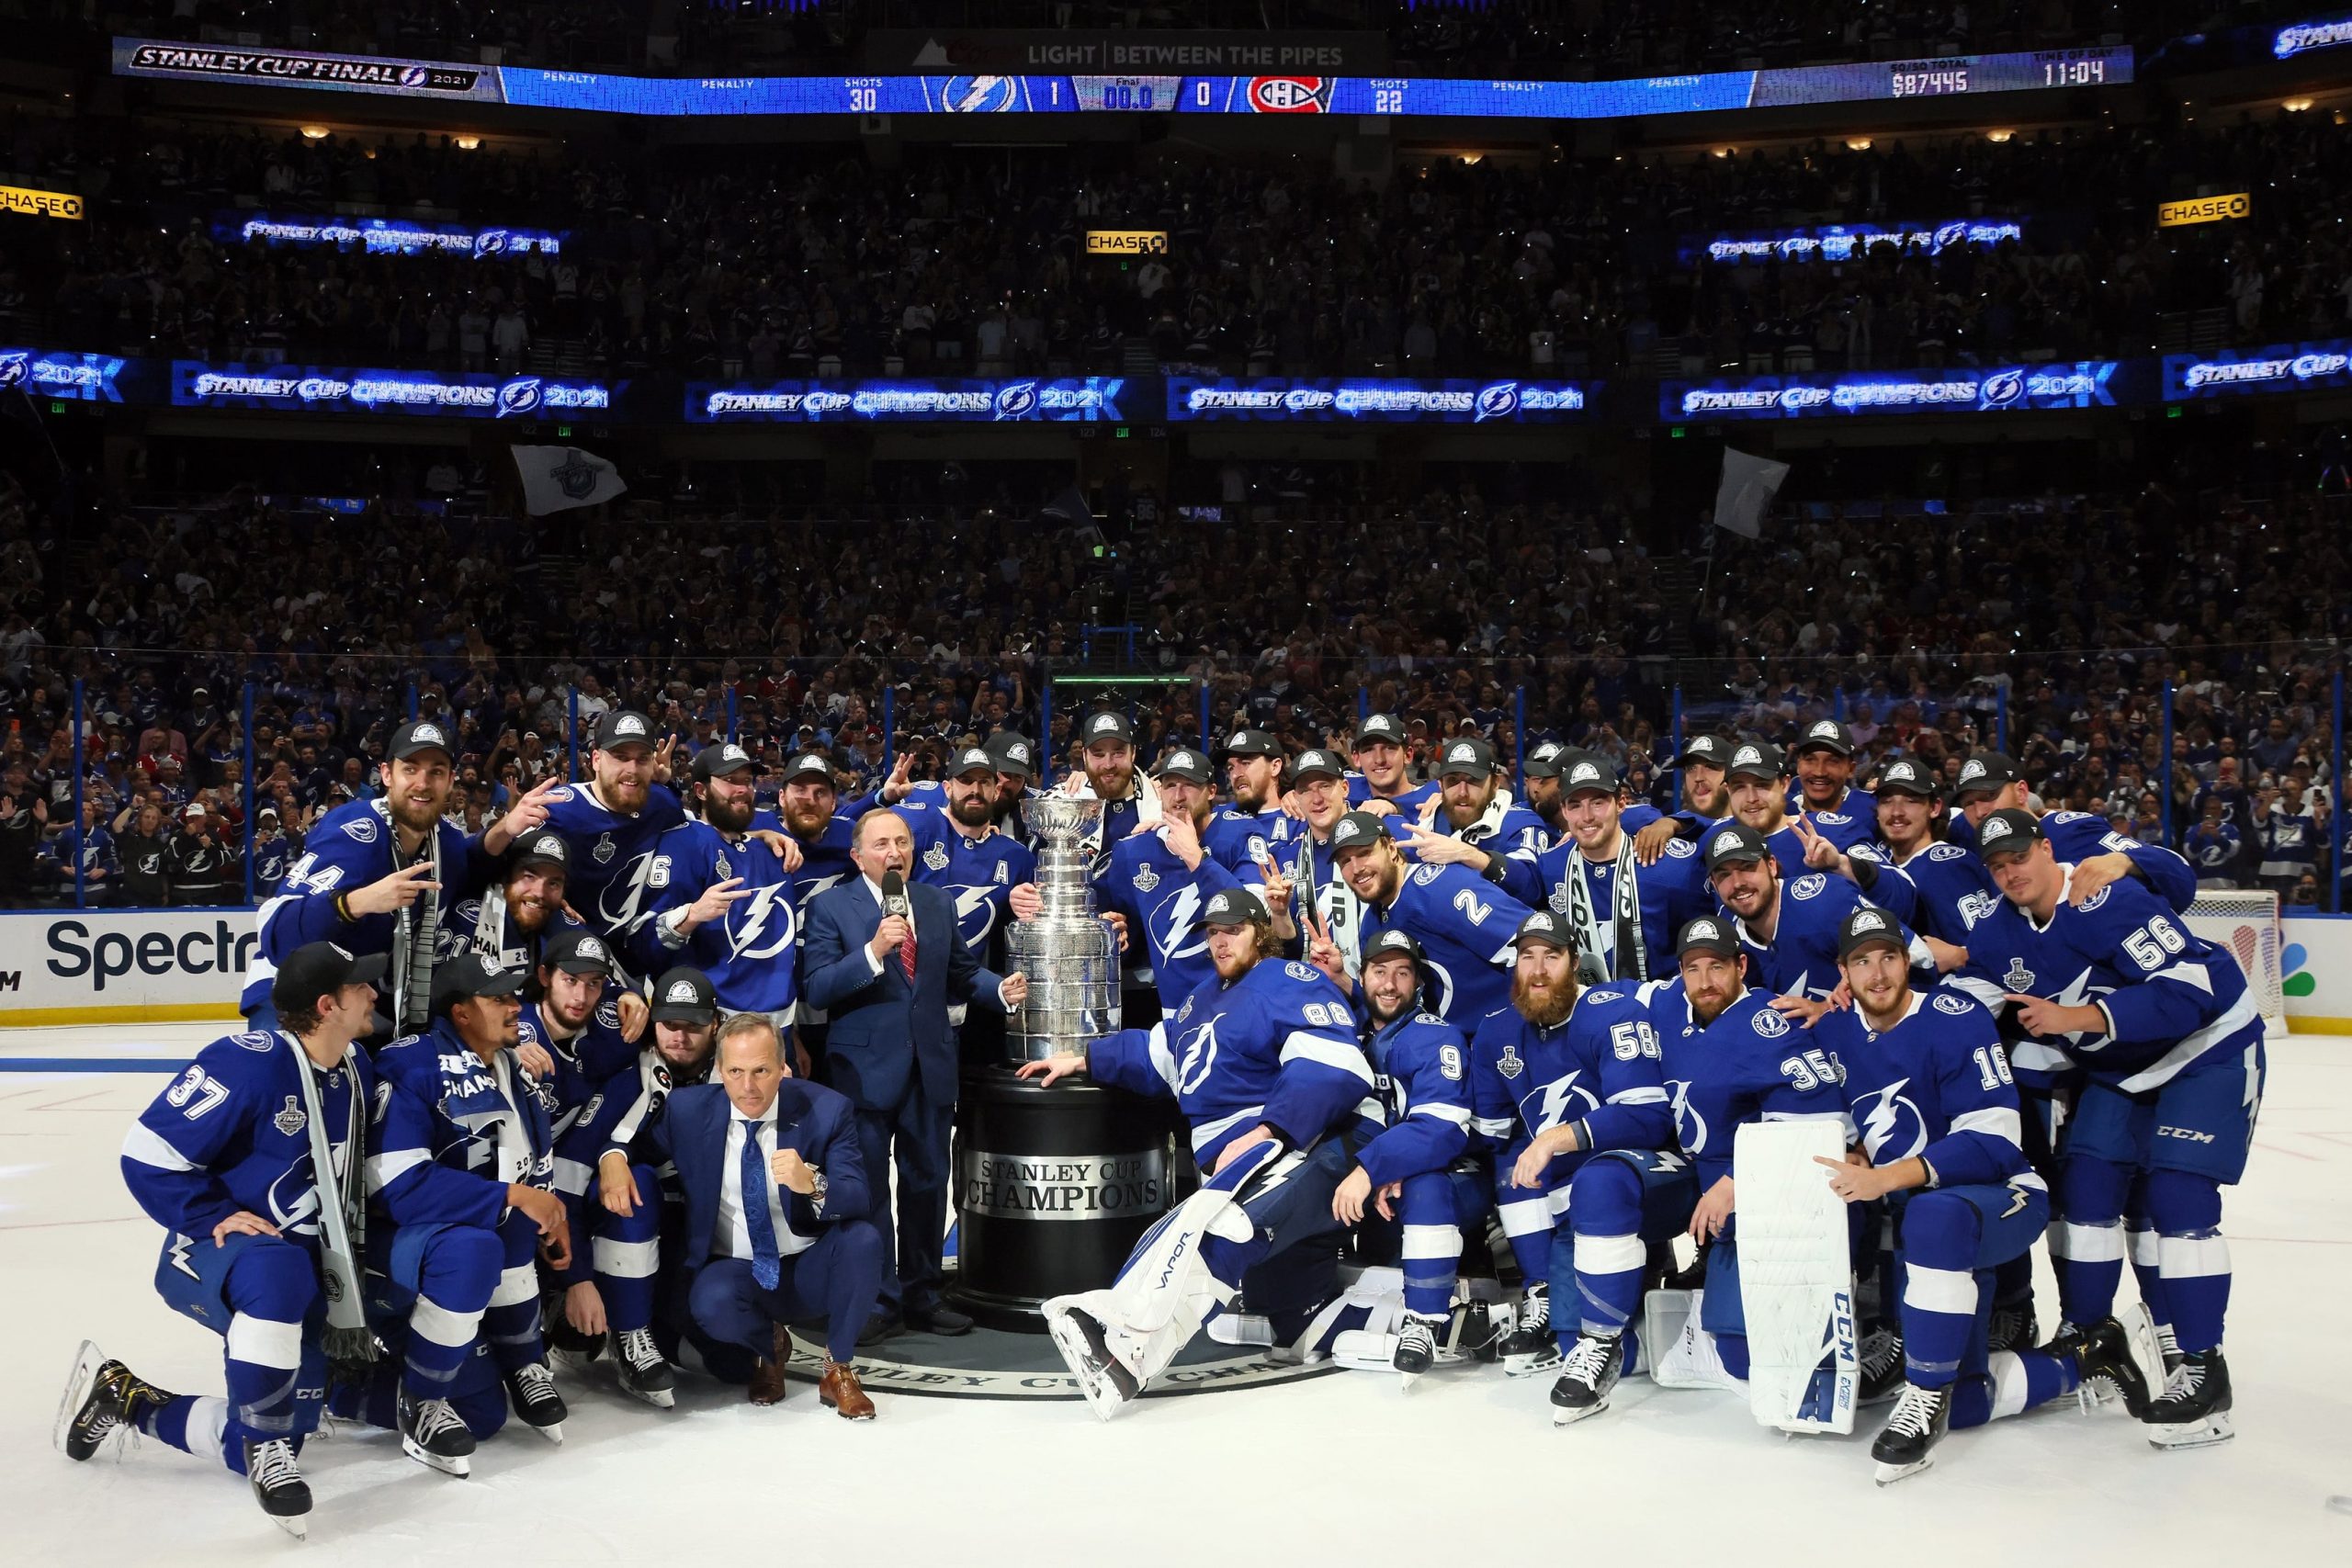 Tampa, Florida, USA; The Tampa Bay Lightning pose with the Stanley Cup after defeating the Montreal Canadiens 1-0 in game five of the 2021 Stanley Cup Final at Amalie Arena